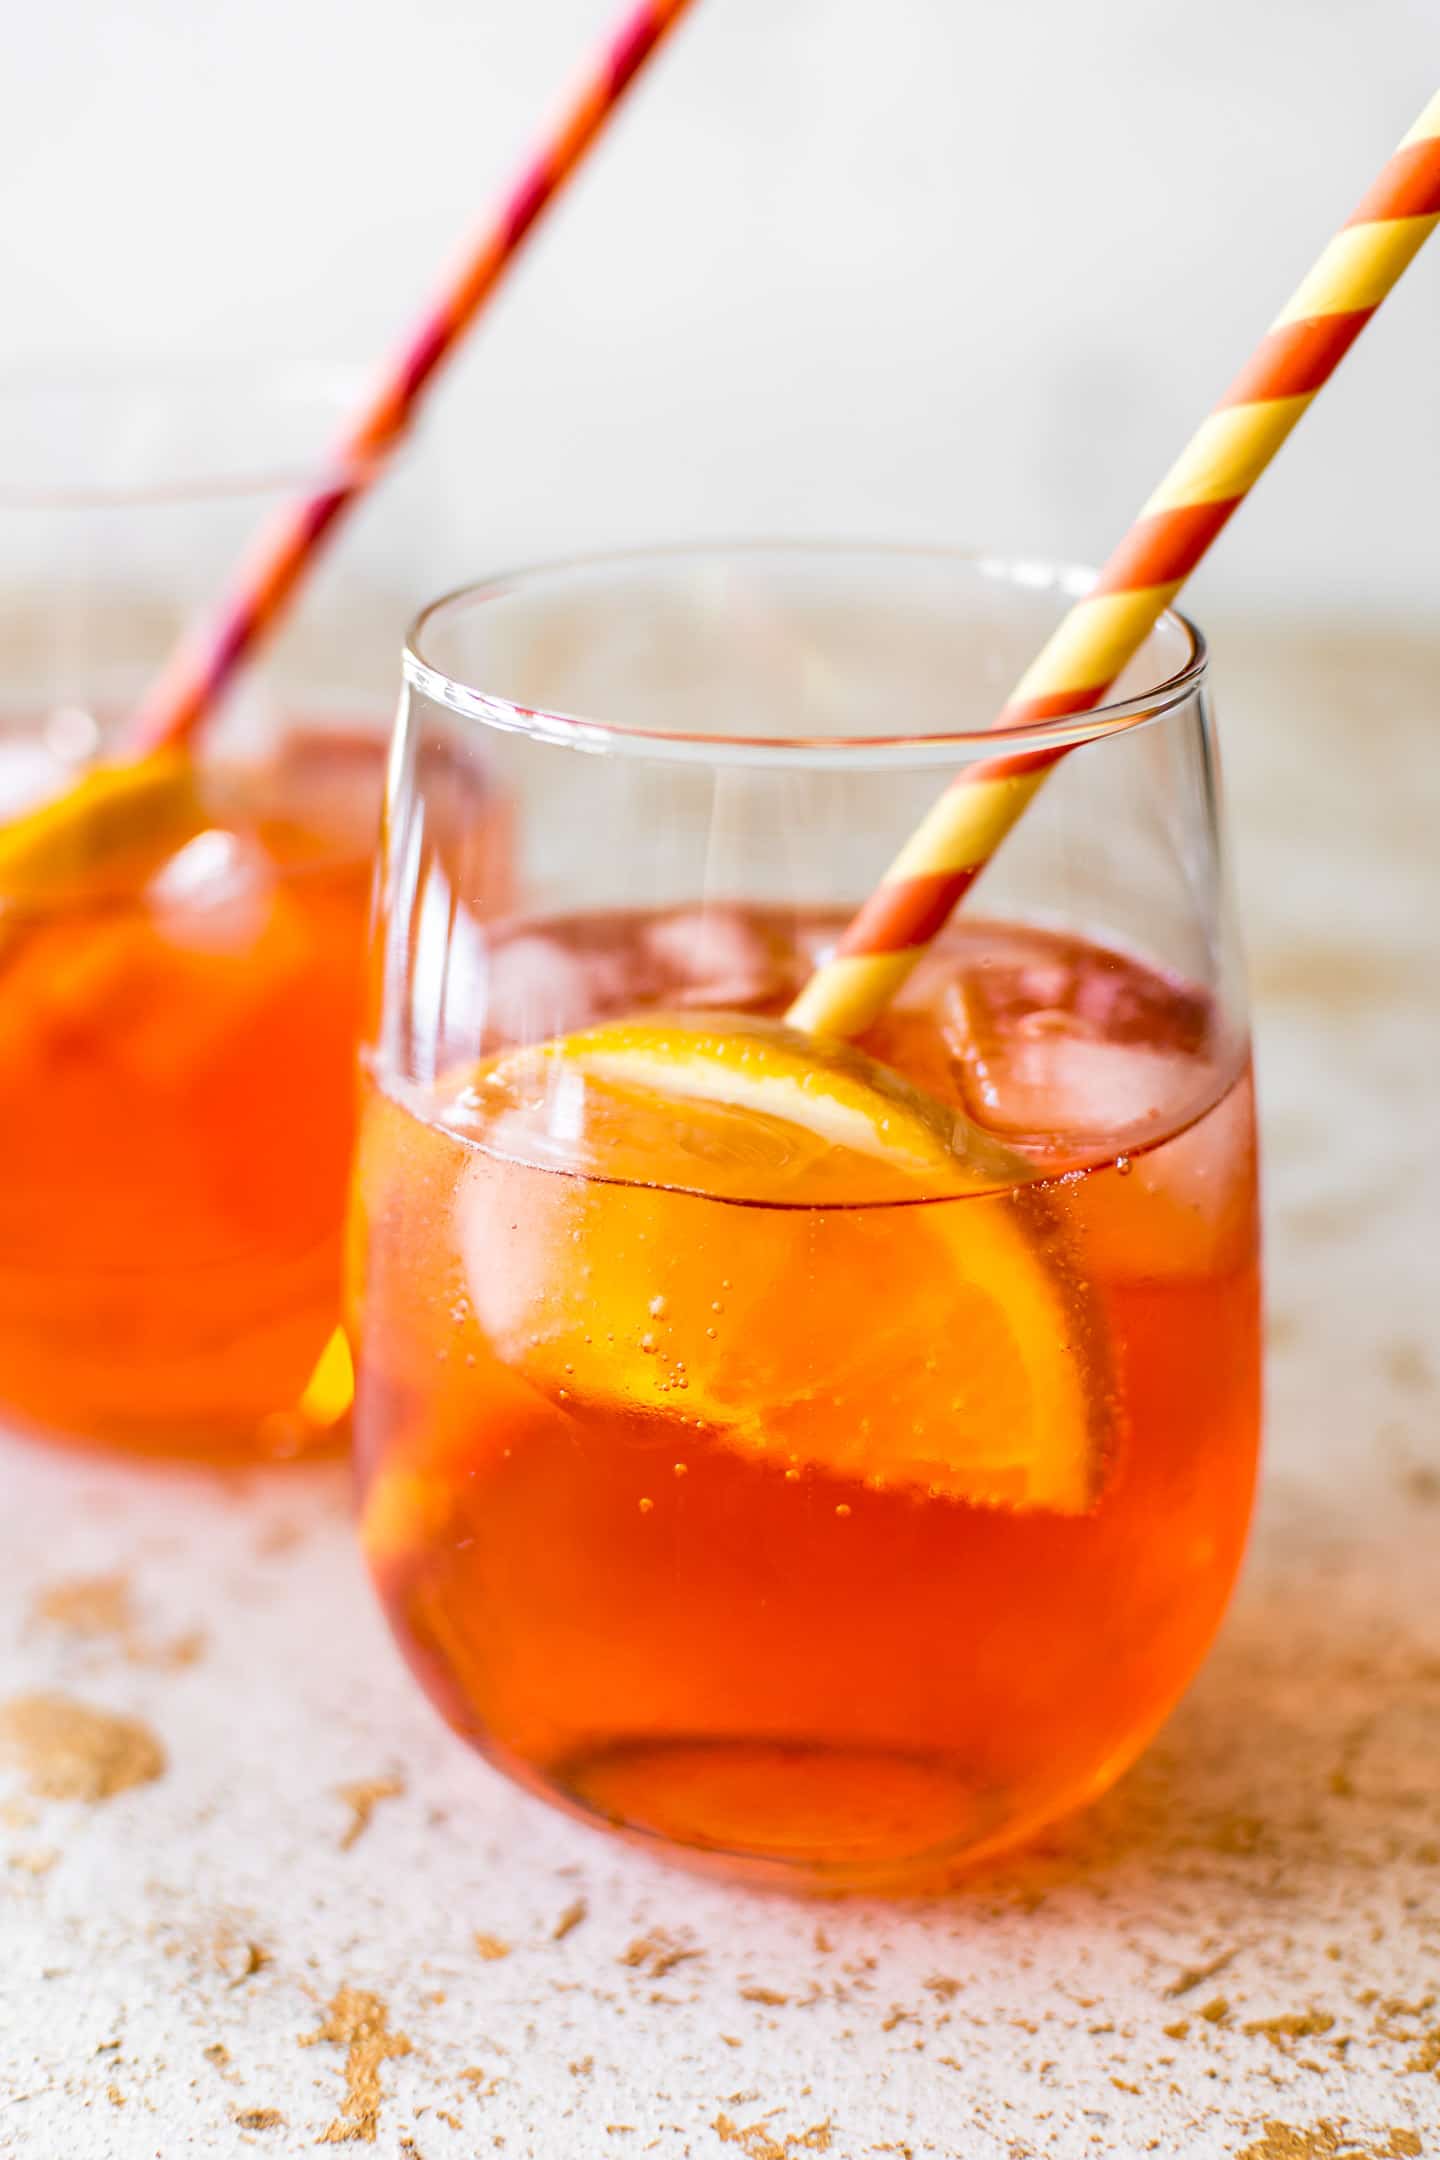 How to Make Aperol Spritz Cocktail - Cooking LSL